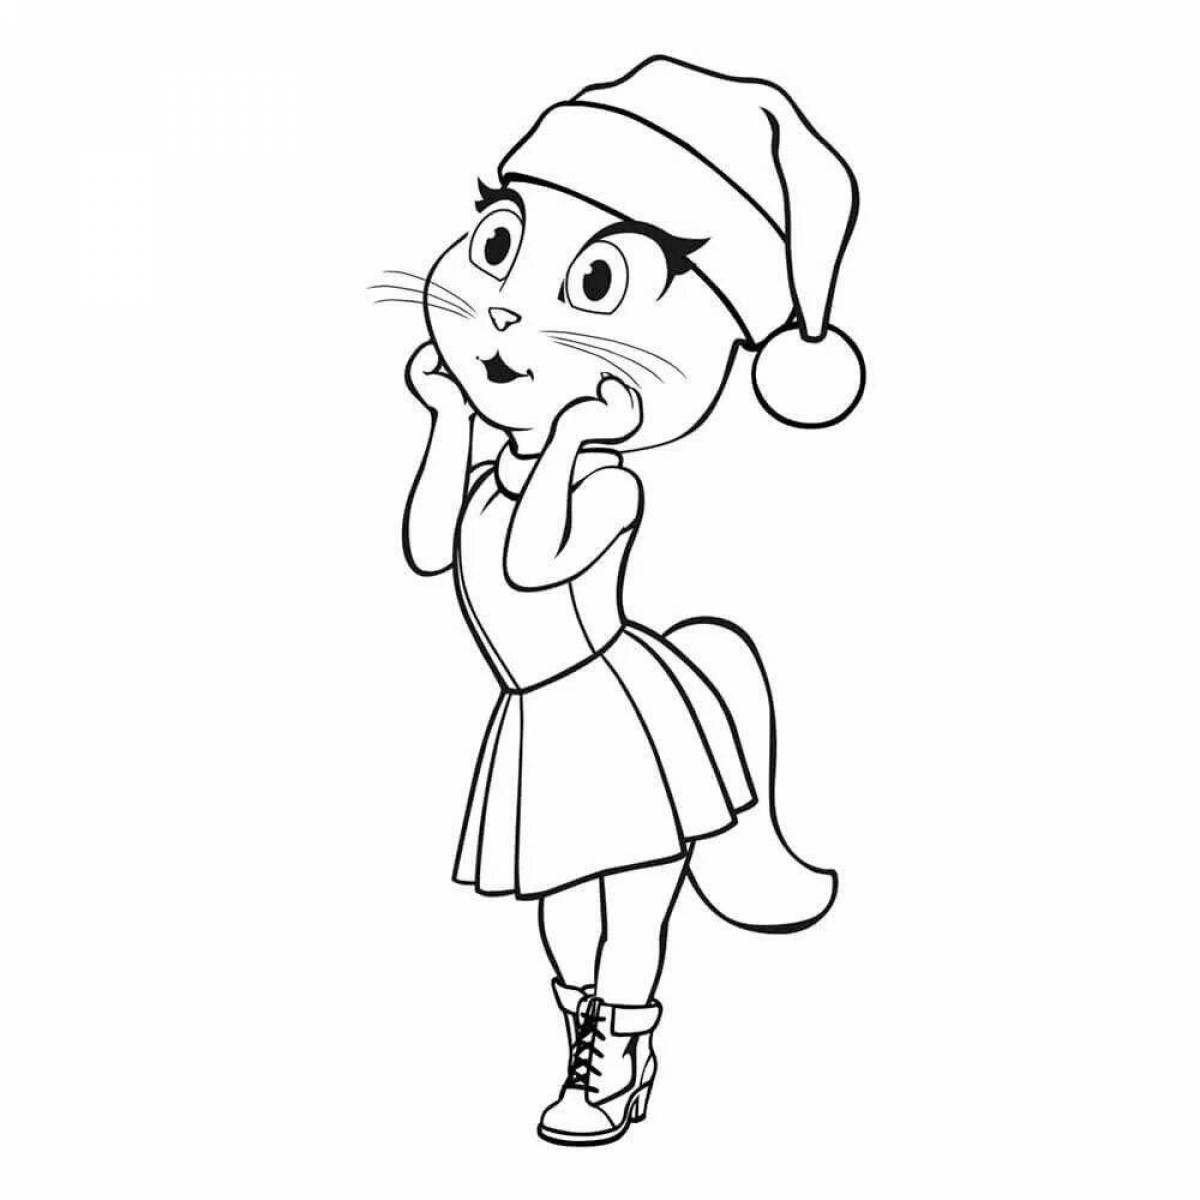 Coloring page adorable angela cat